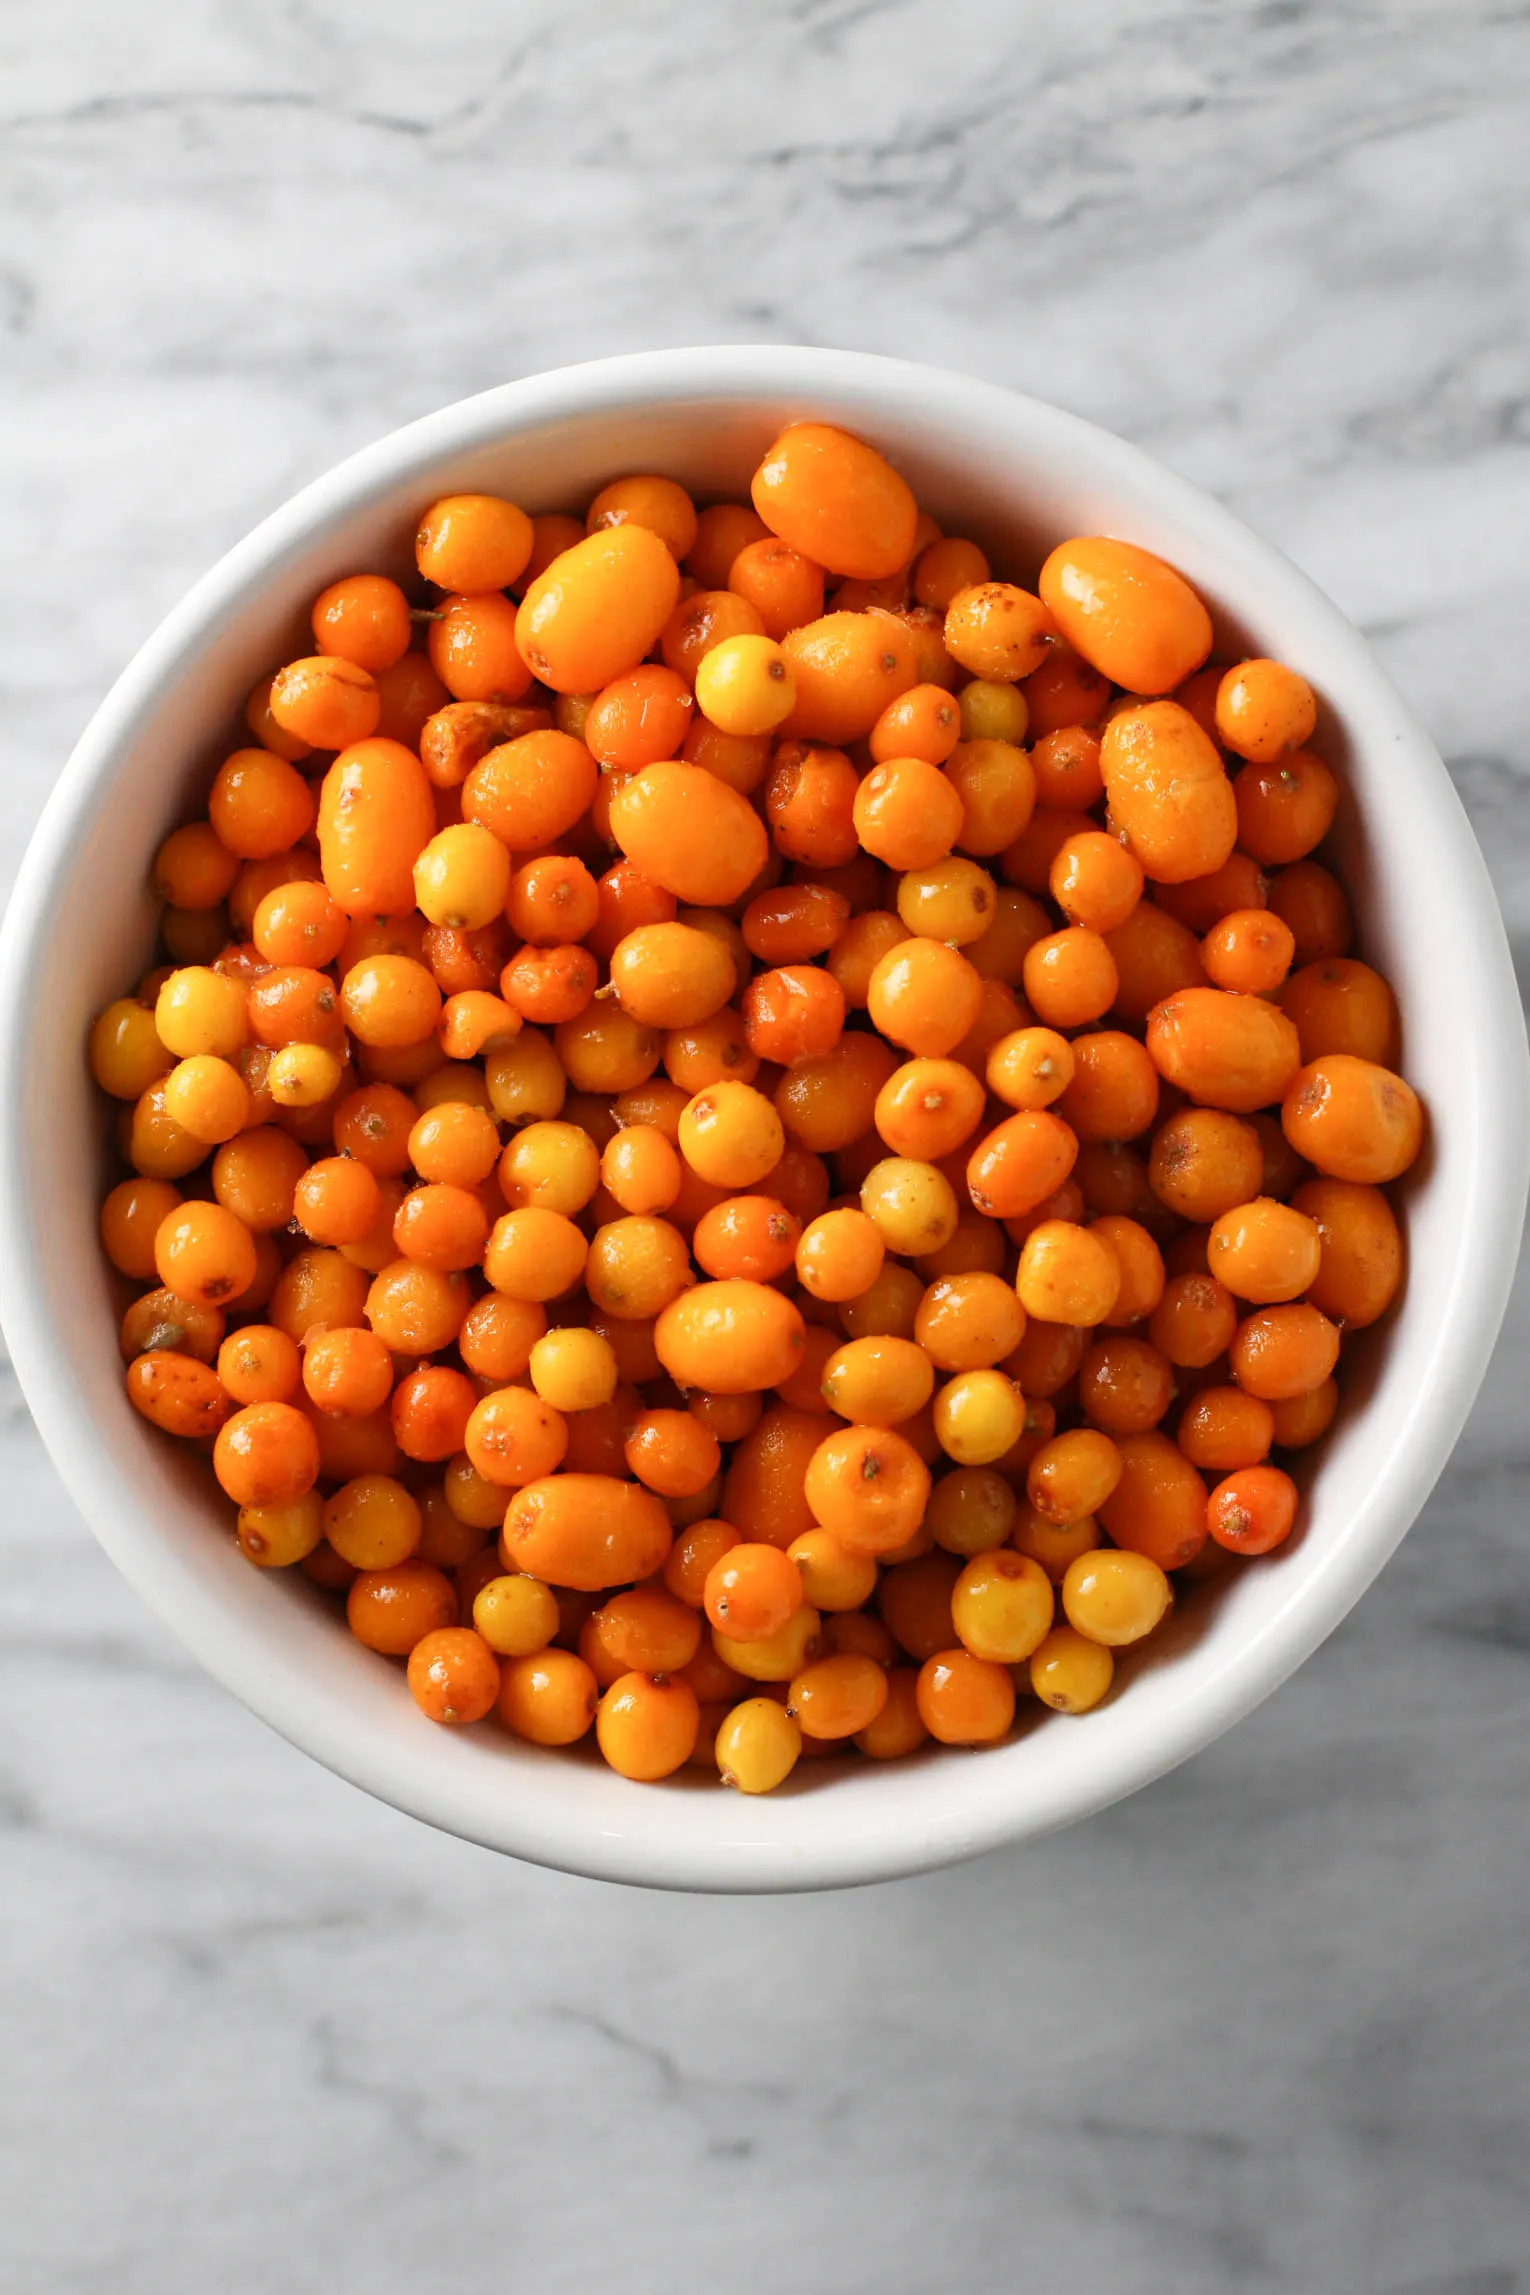 Overhead shot of sea buckthorn berries in a white bowl standing on a marble background.